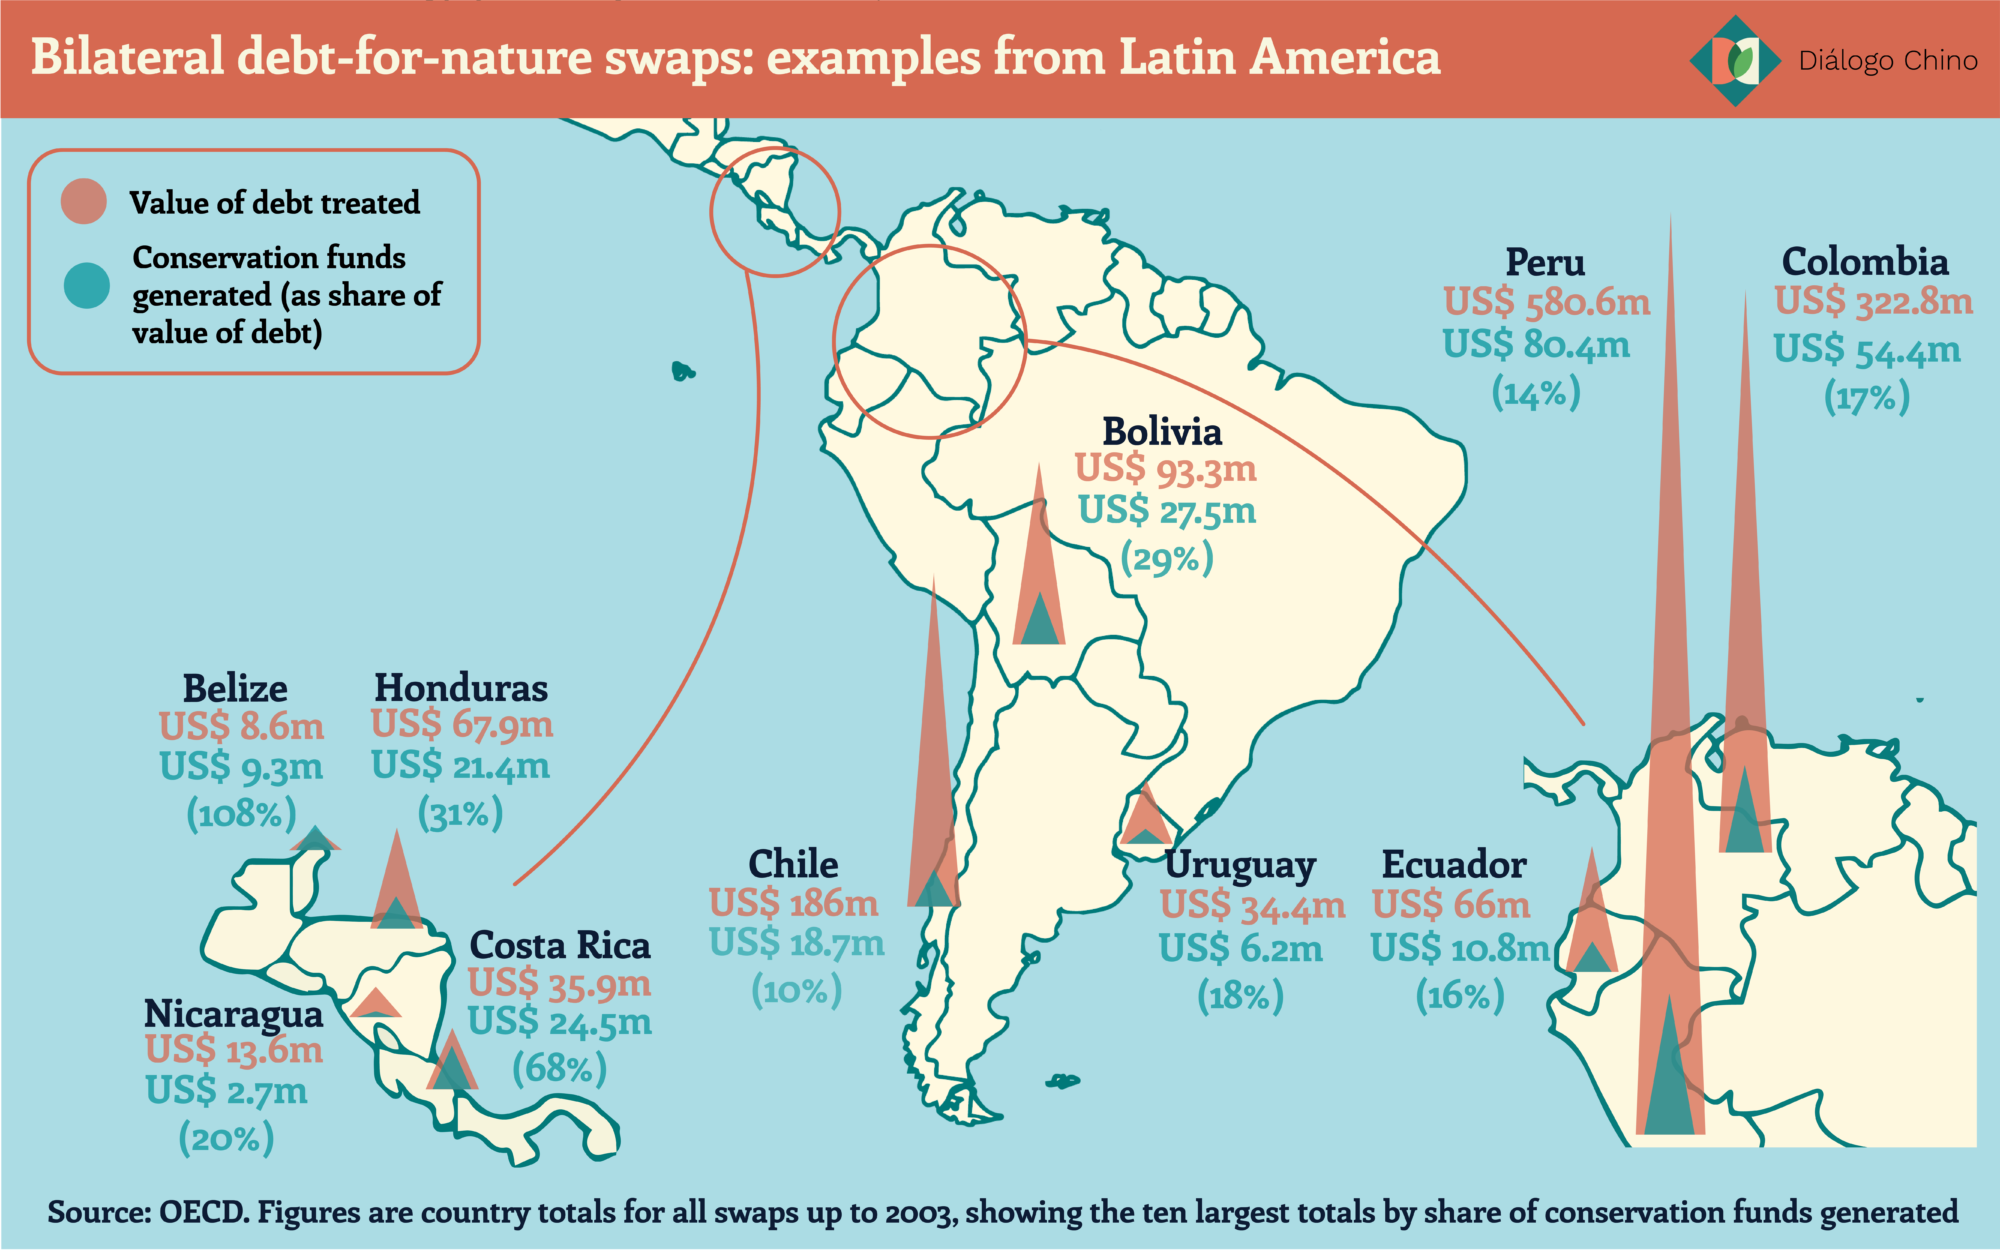 Map of Latin America with examples of countries with debt-for-nature swaps